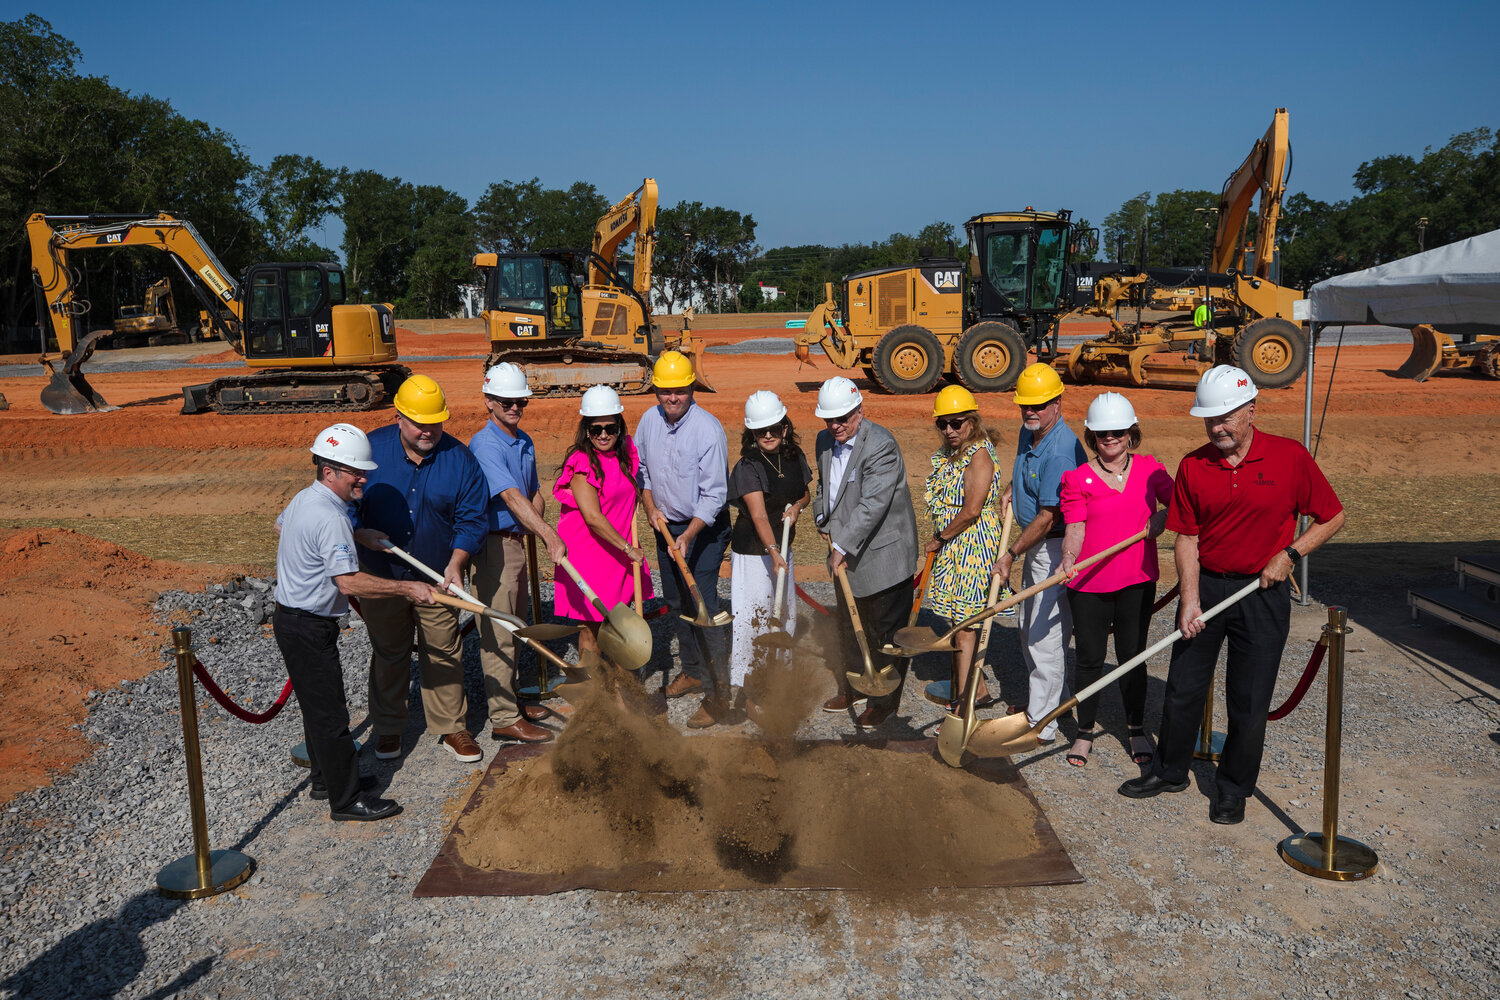 The Poarch Band of Creek Indians, Holtz Companies and the city of Foley broke ground Tuesday, Aug. 15, on an $18 million seasonal workforce campus in Foley.